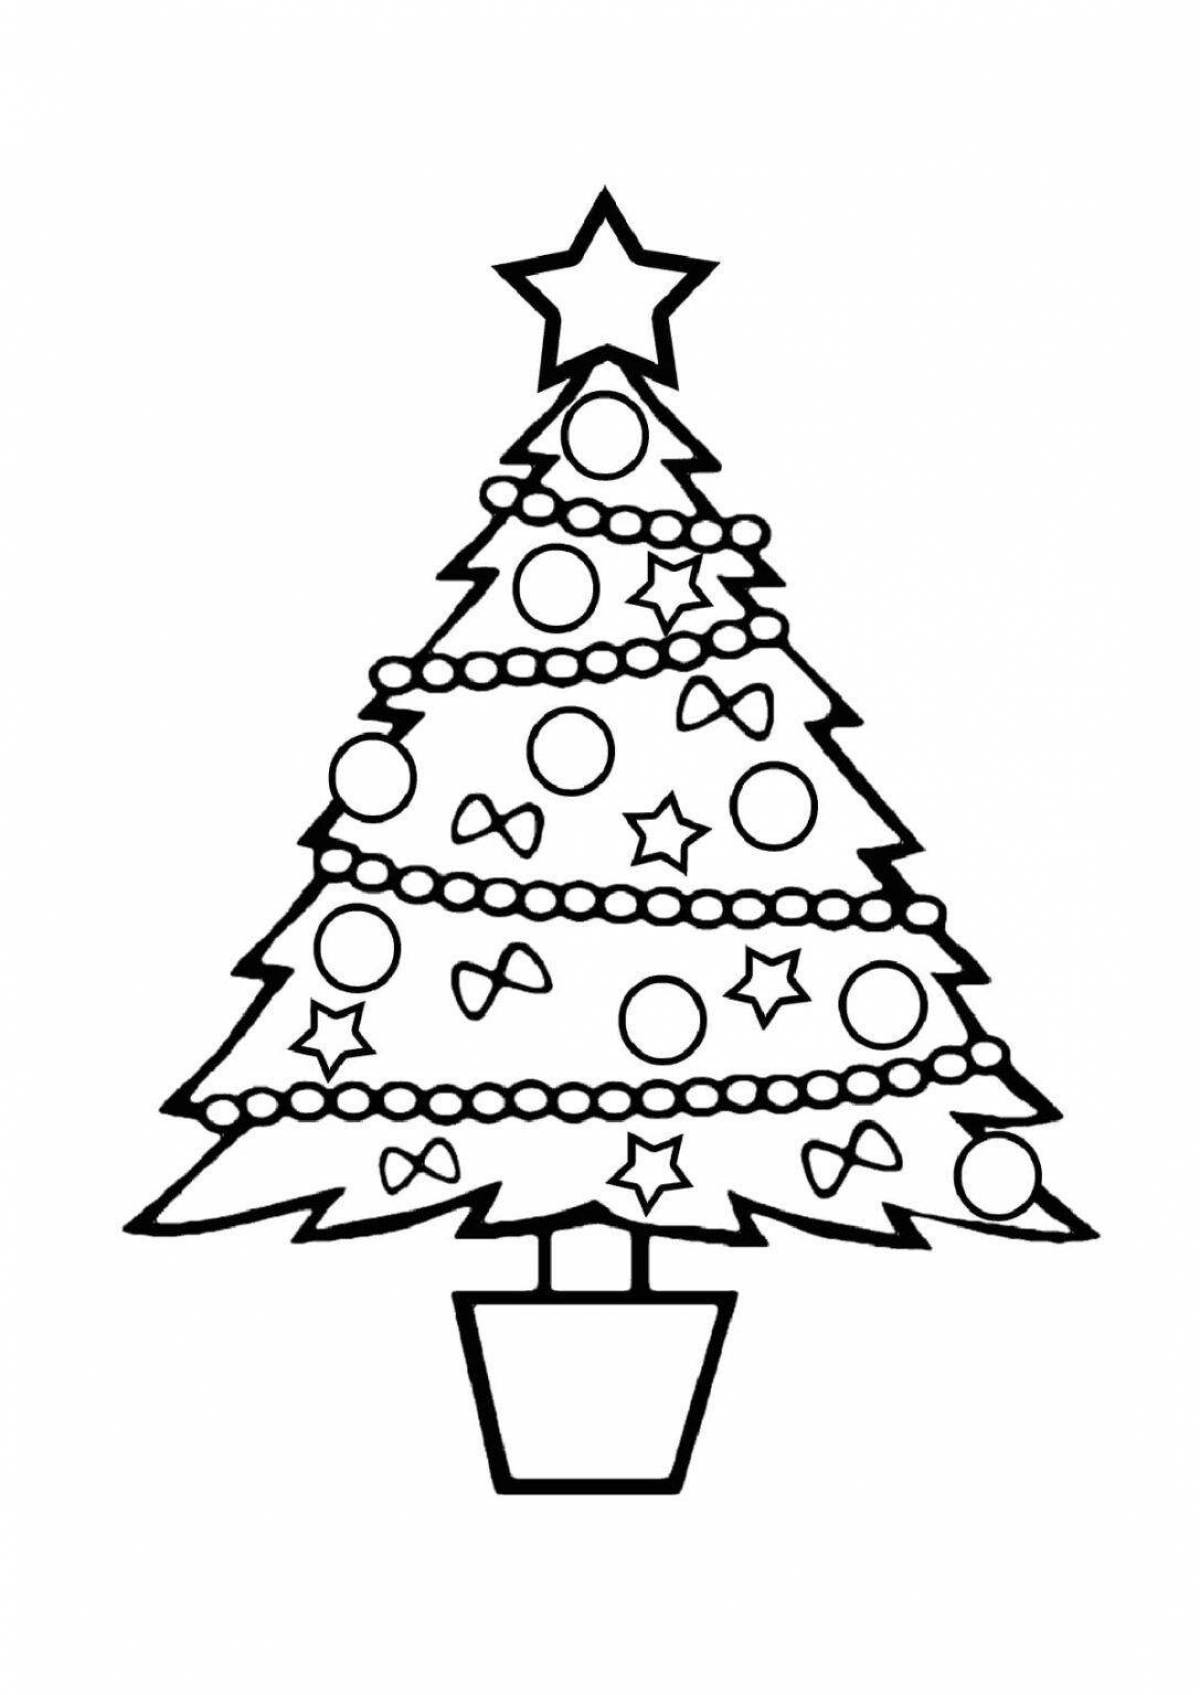 Coloring book sparkling children's tree